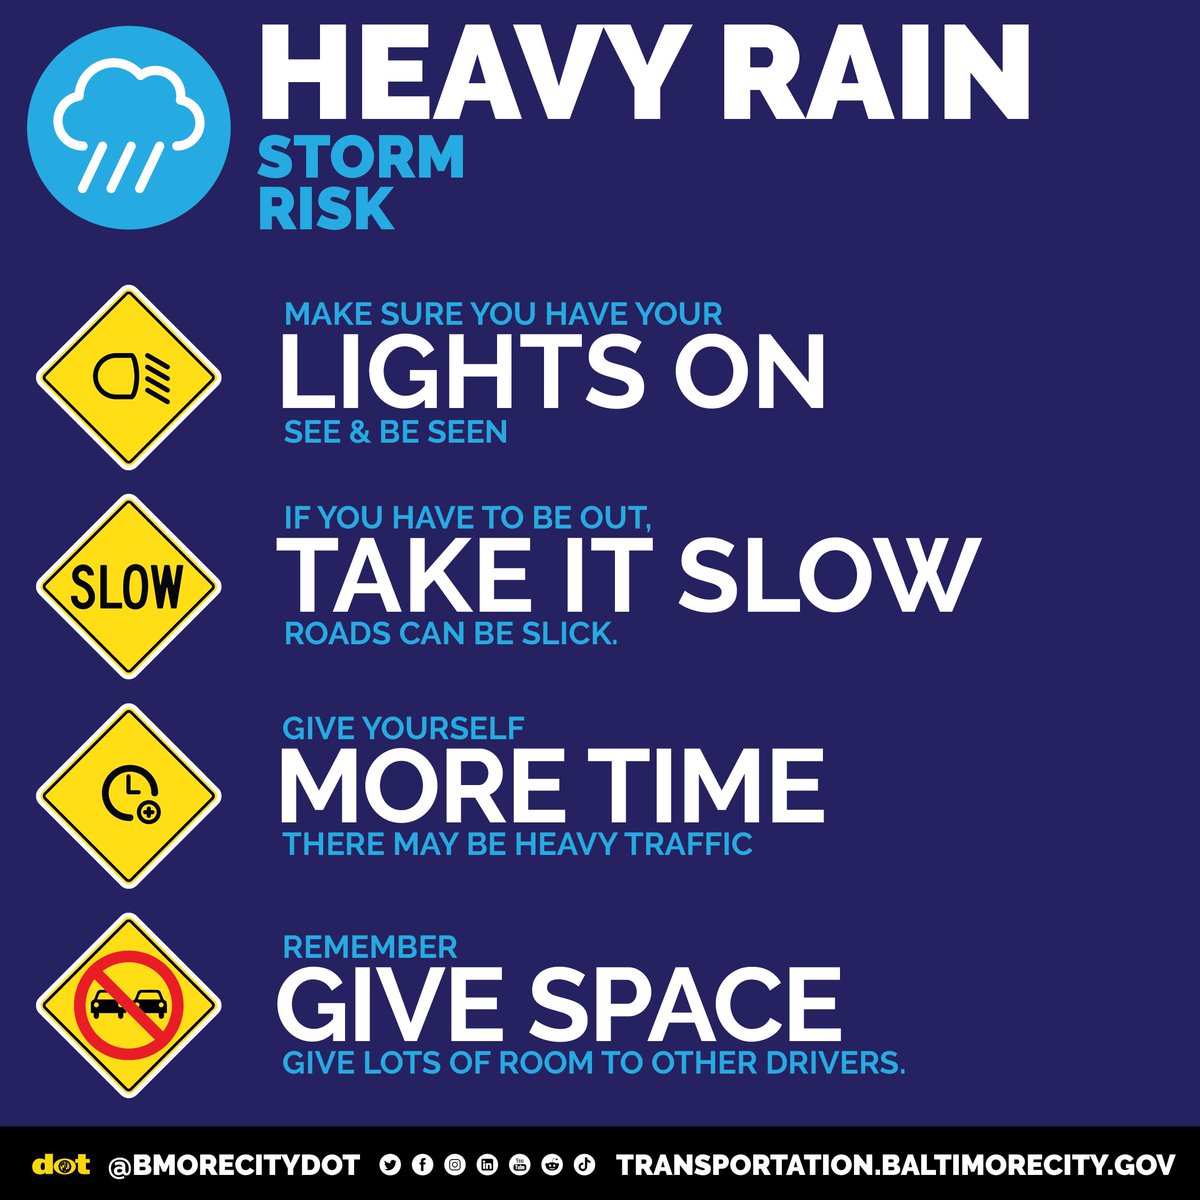 🌧️ Heavy Rain Storm Risk Today & Tomorrow 💡 When driving, turn your lights on. 👁️ See & be seen. ⚠️ If you have to be out, take it slow. 💦 Roads can be slick. ⏱️ Give yourself more time. 🚦 There may be heavy traffic. 🚙 Remember, give space. 🚐 Give lots of room to others.